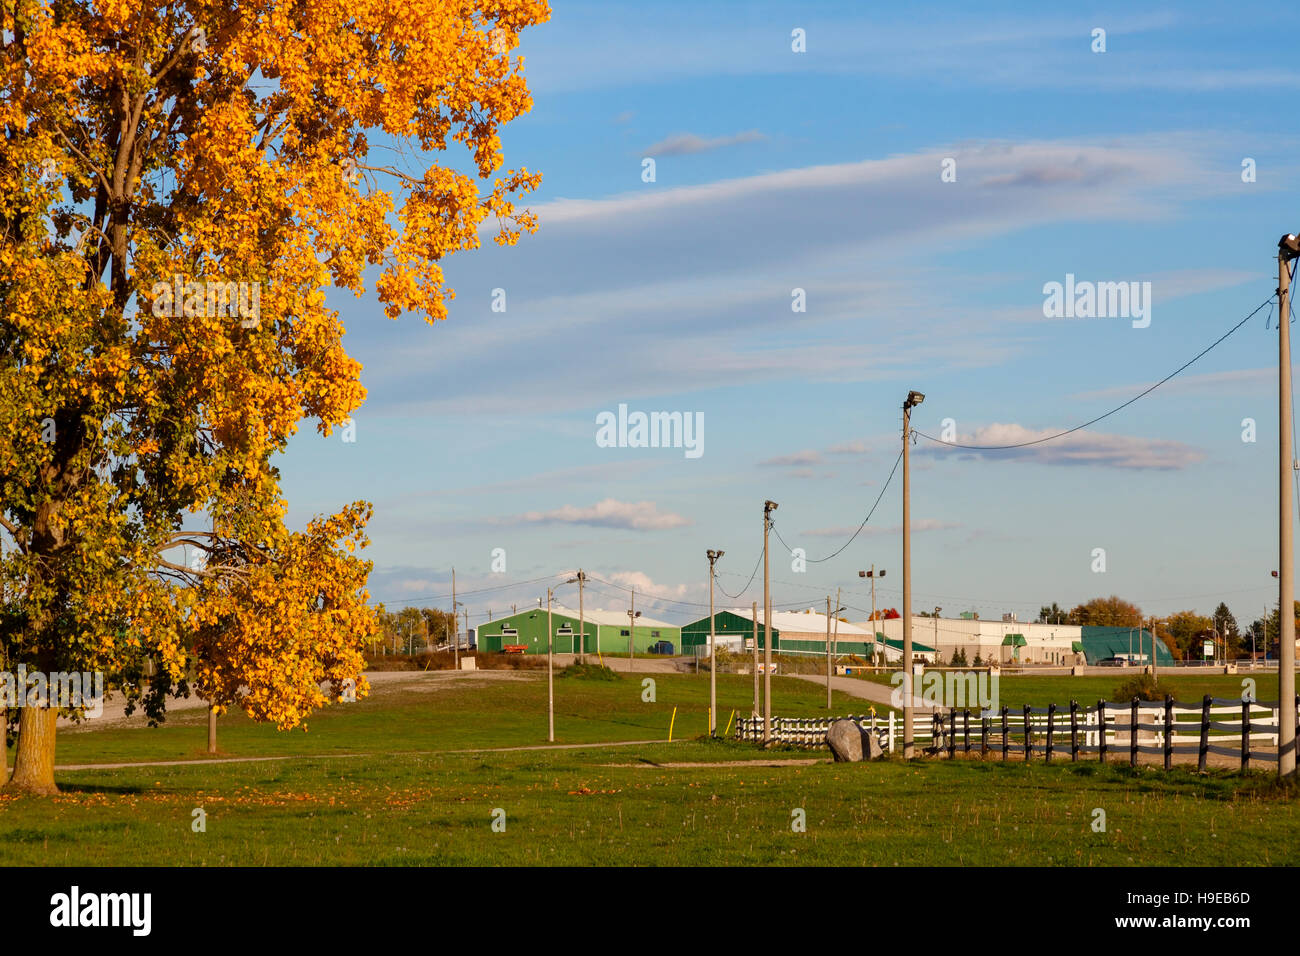 The Paris Agricultural Society and Fairgrounds in Paris, Brant County, Ontario, Canada. Stock Photo